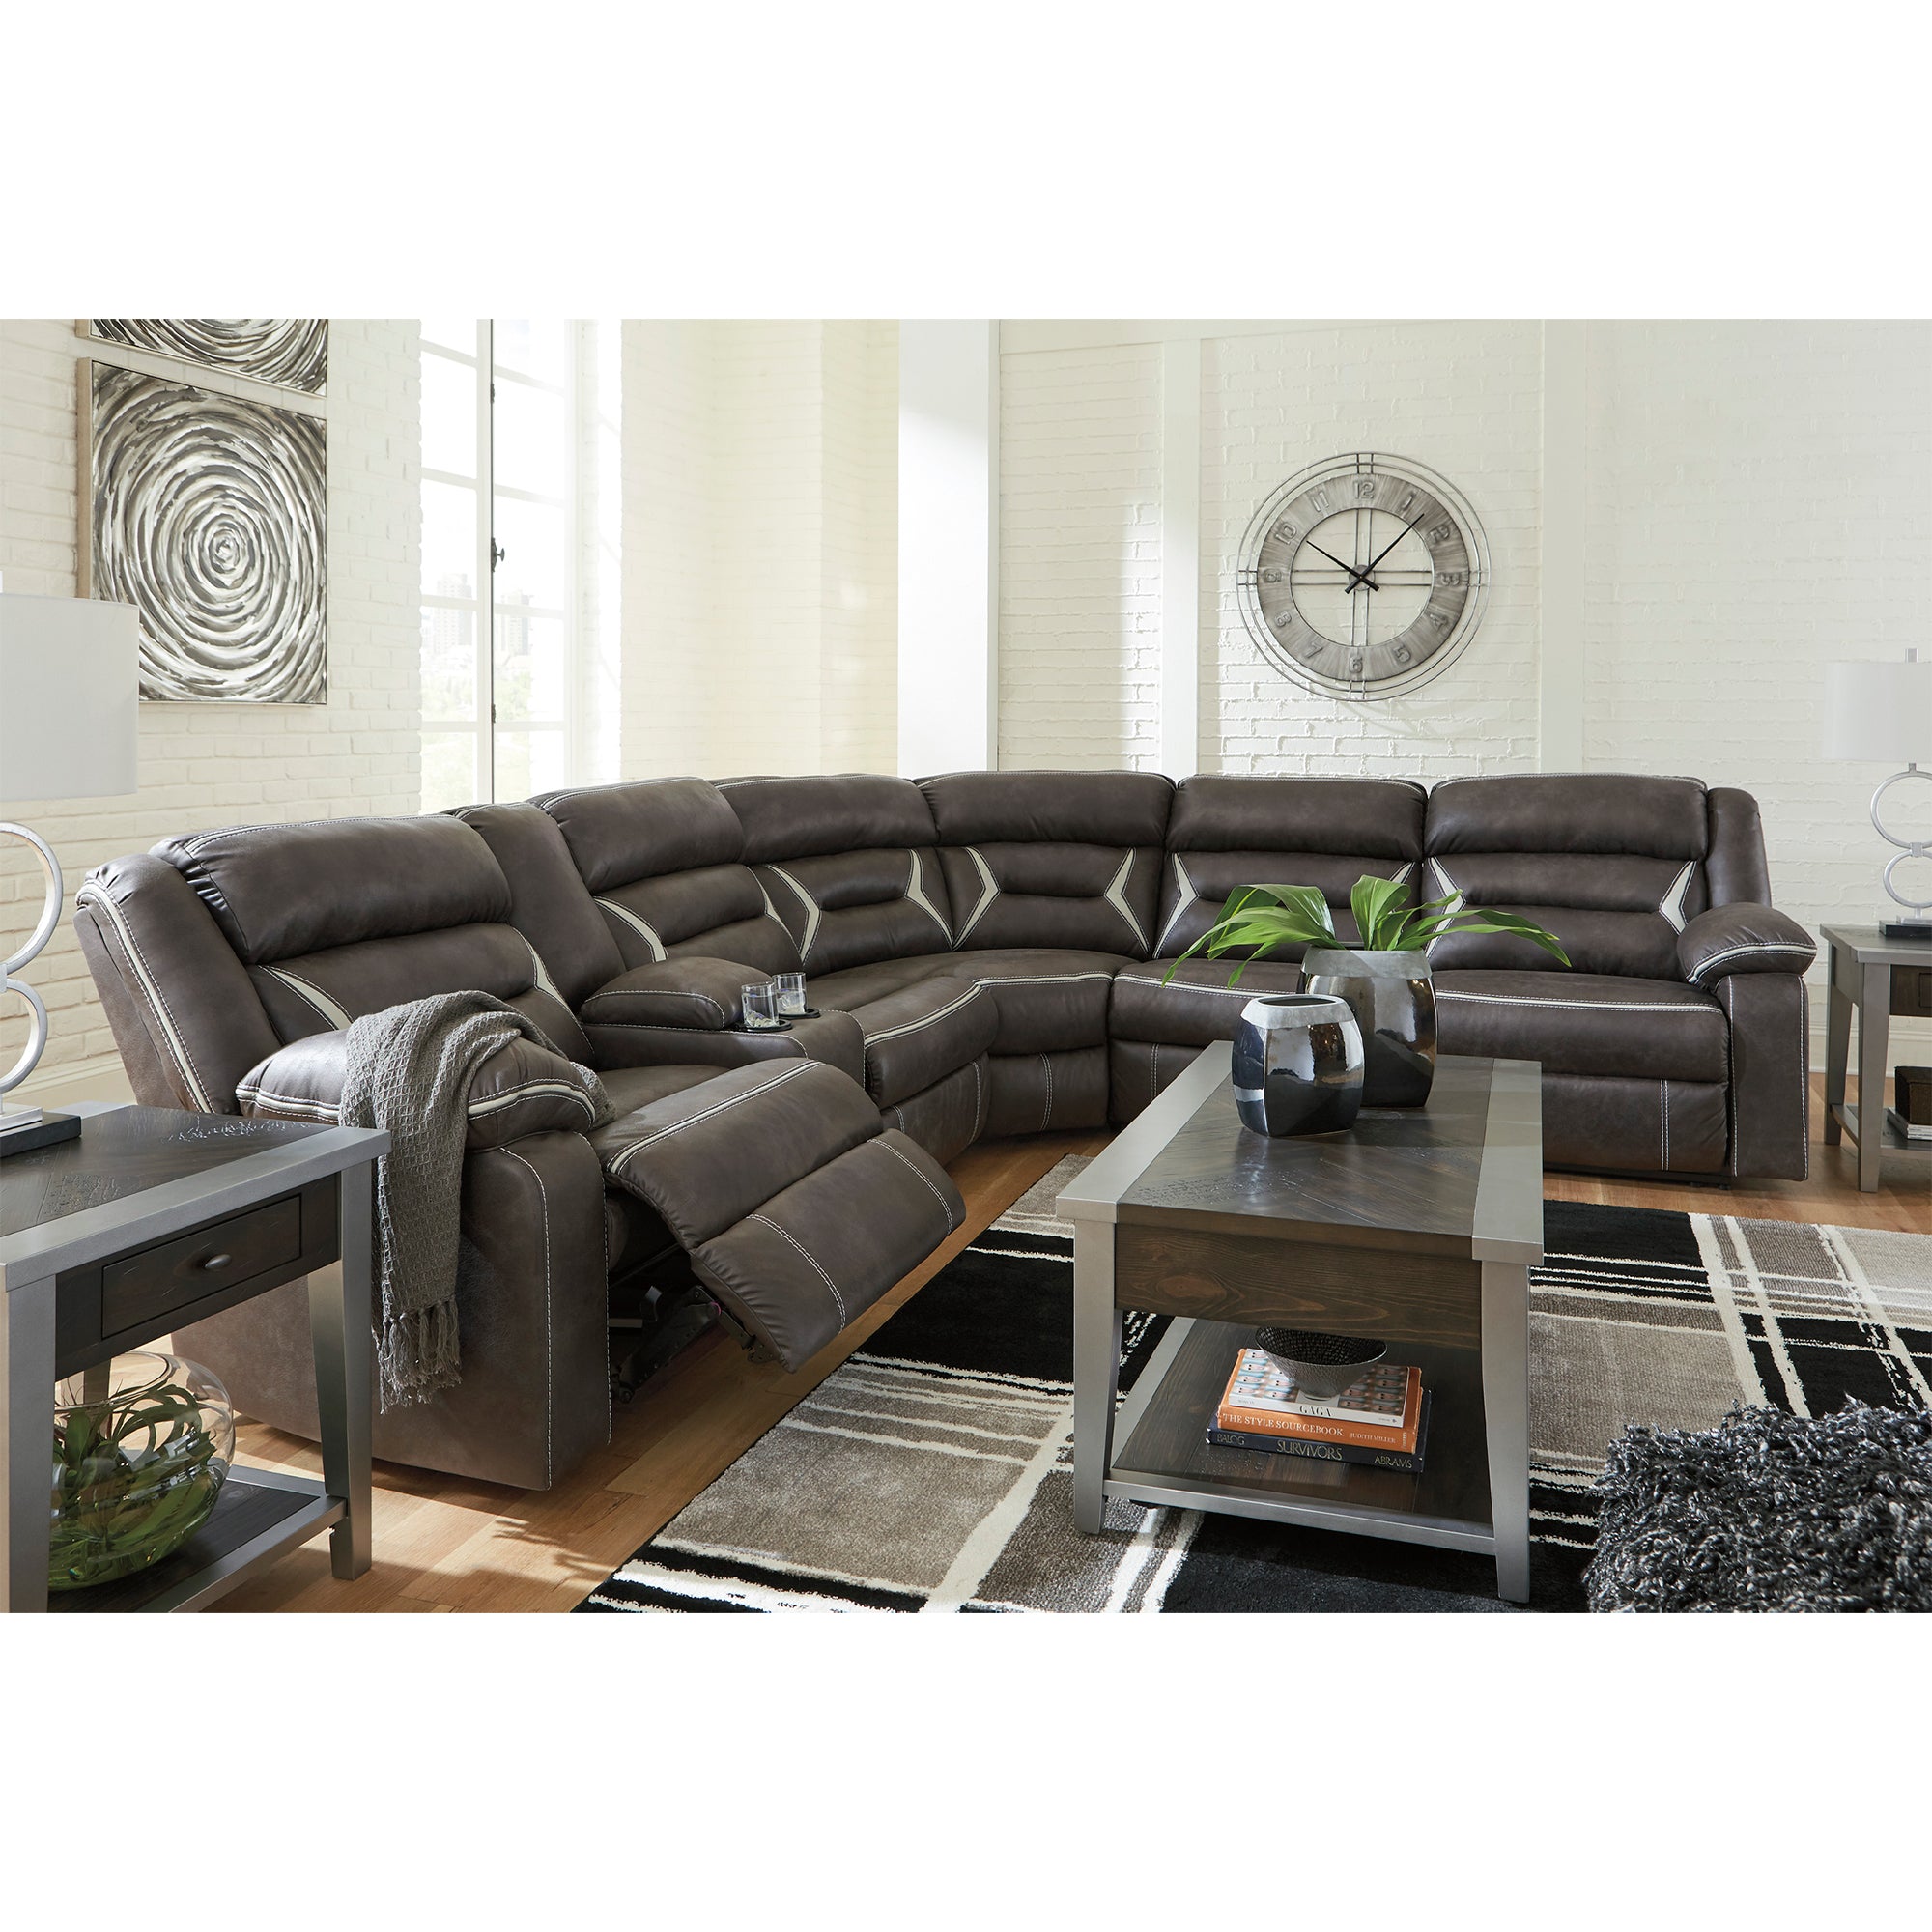 Kincord 4-Piece Power Reclining Sectional